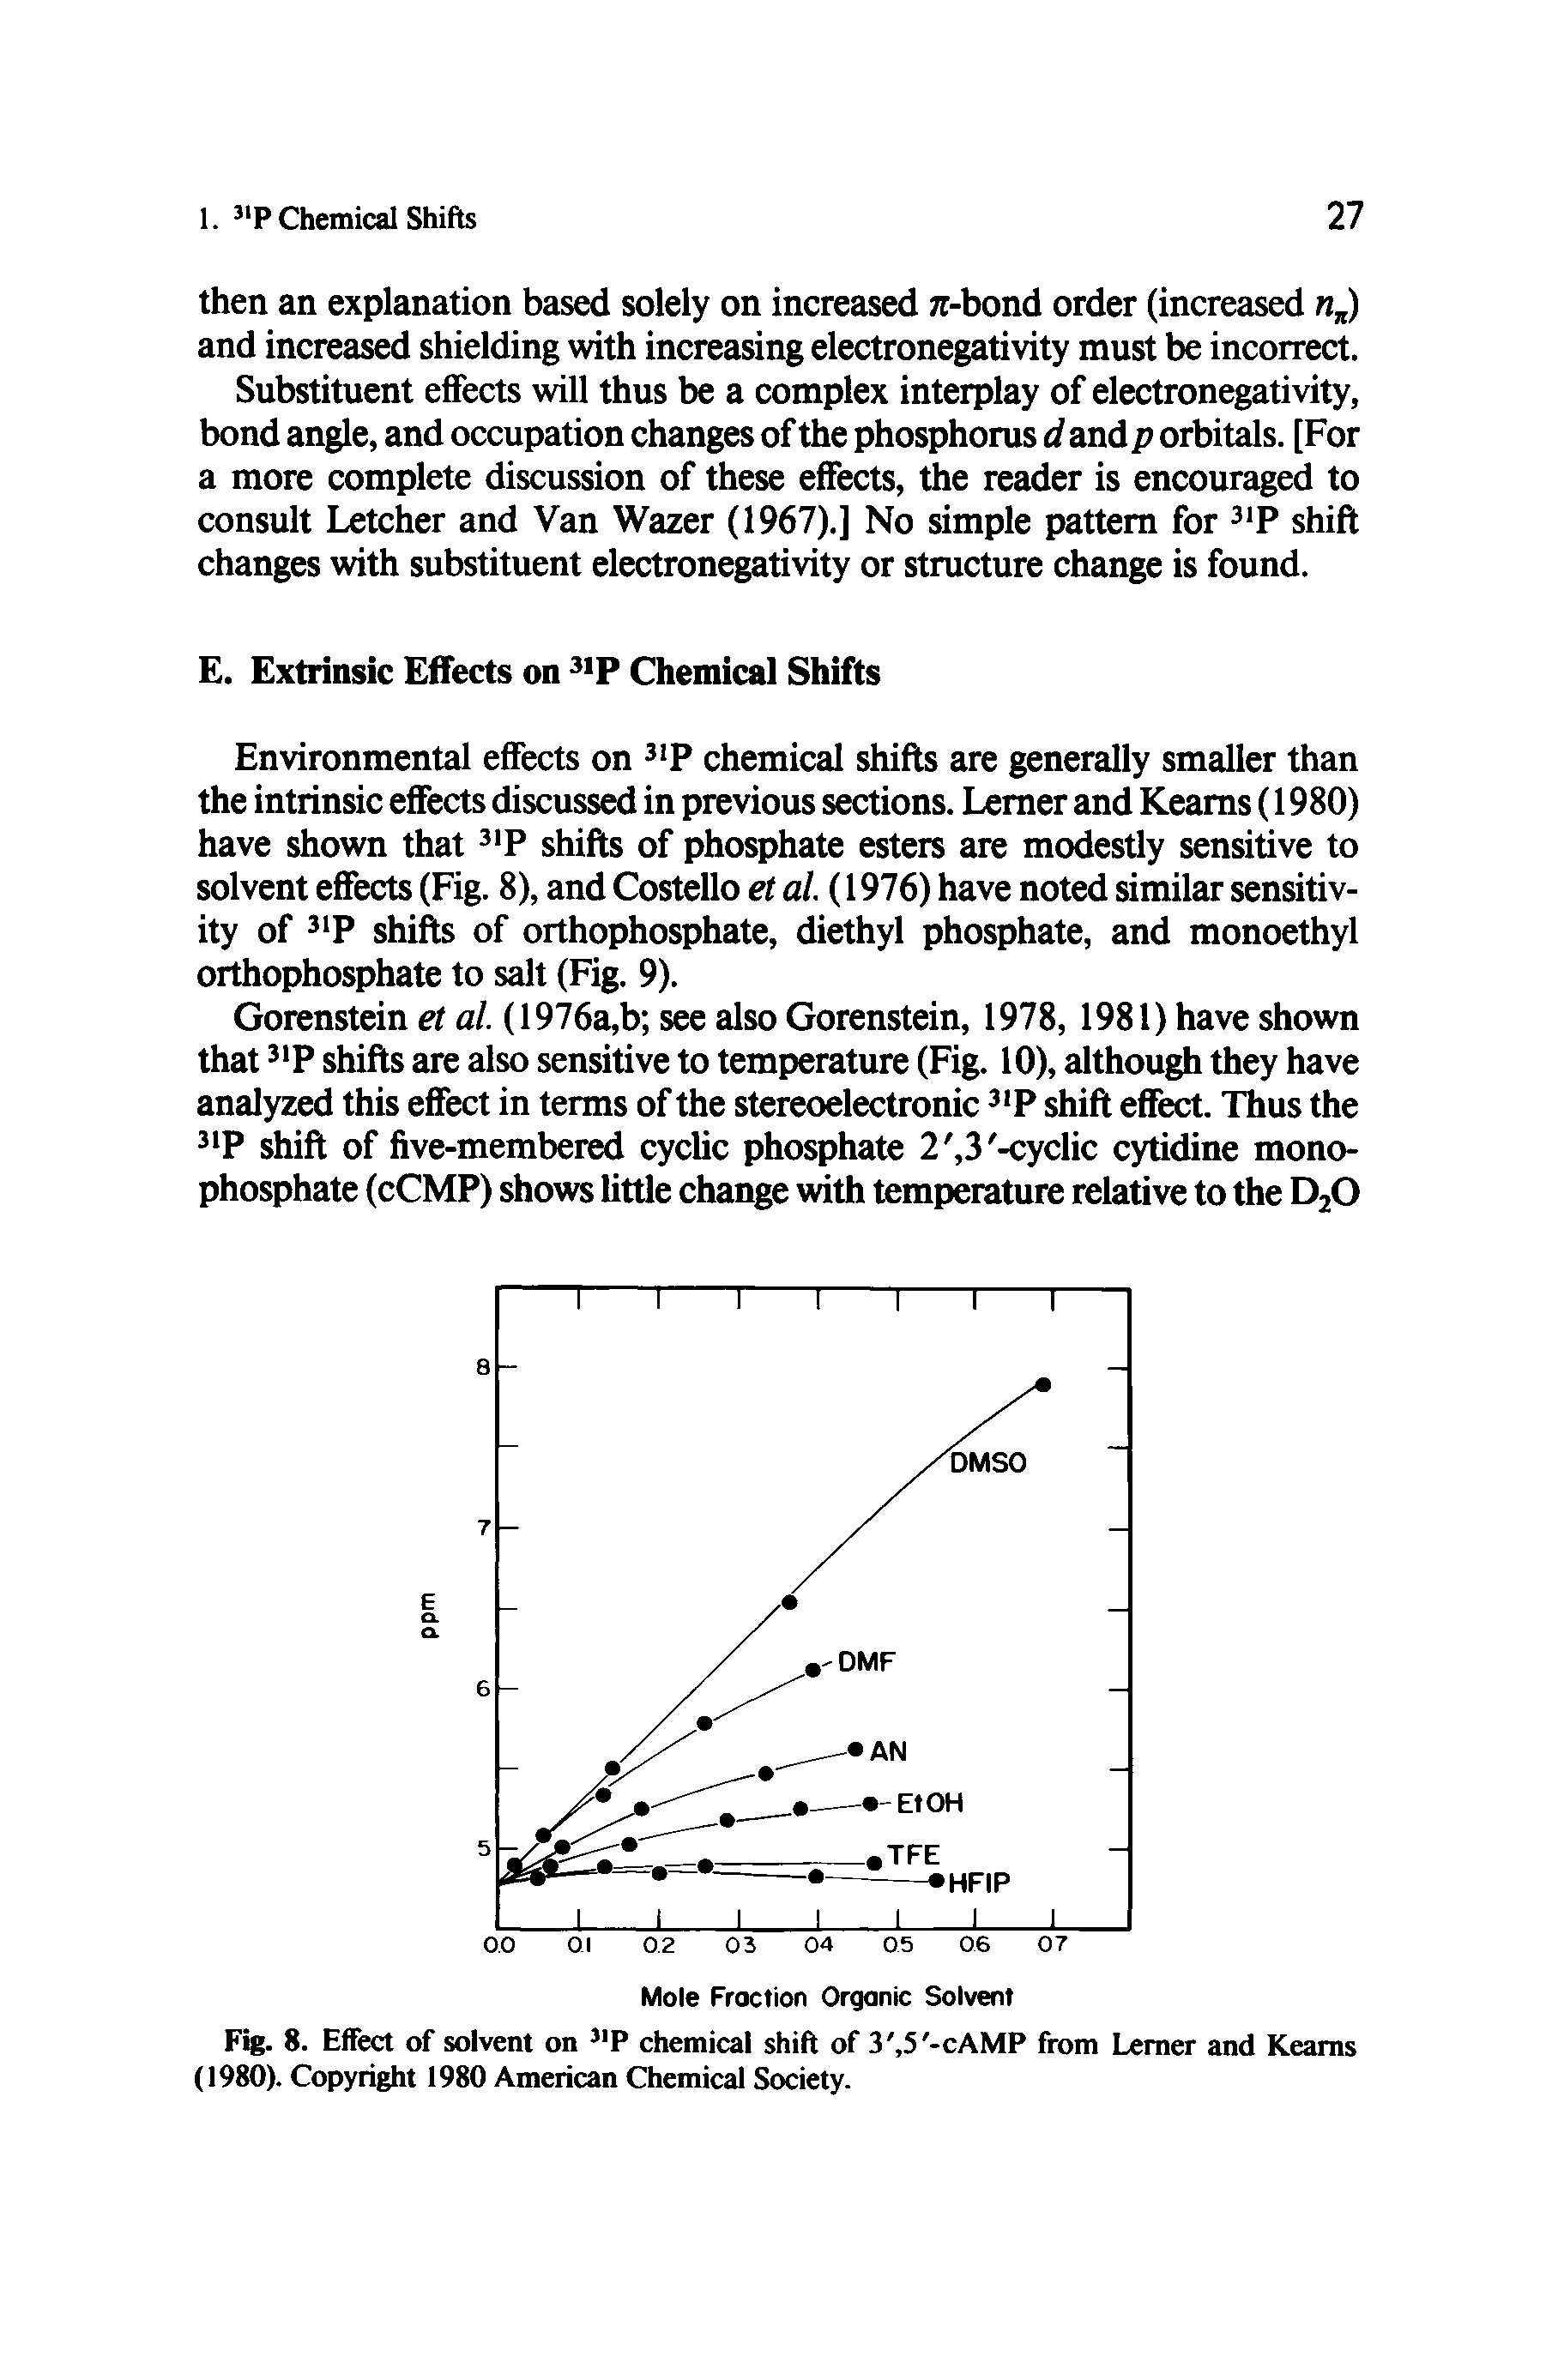 Fig. 8. Effect of solvent on P chemical shift of 3, 5 -cAMP from Lemer and Kearns (1980). Copyright 1980 American Chemical Society.